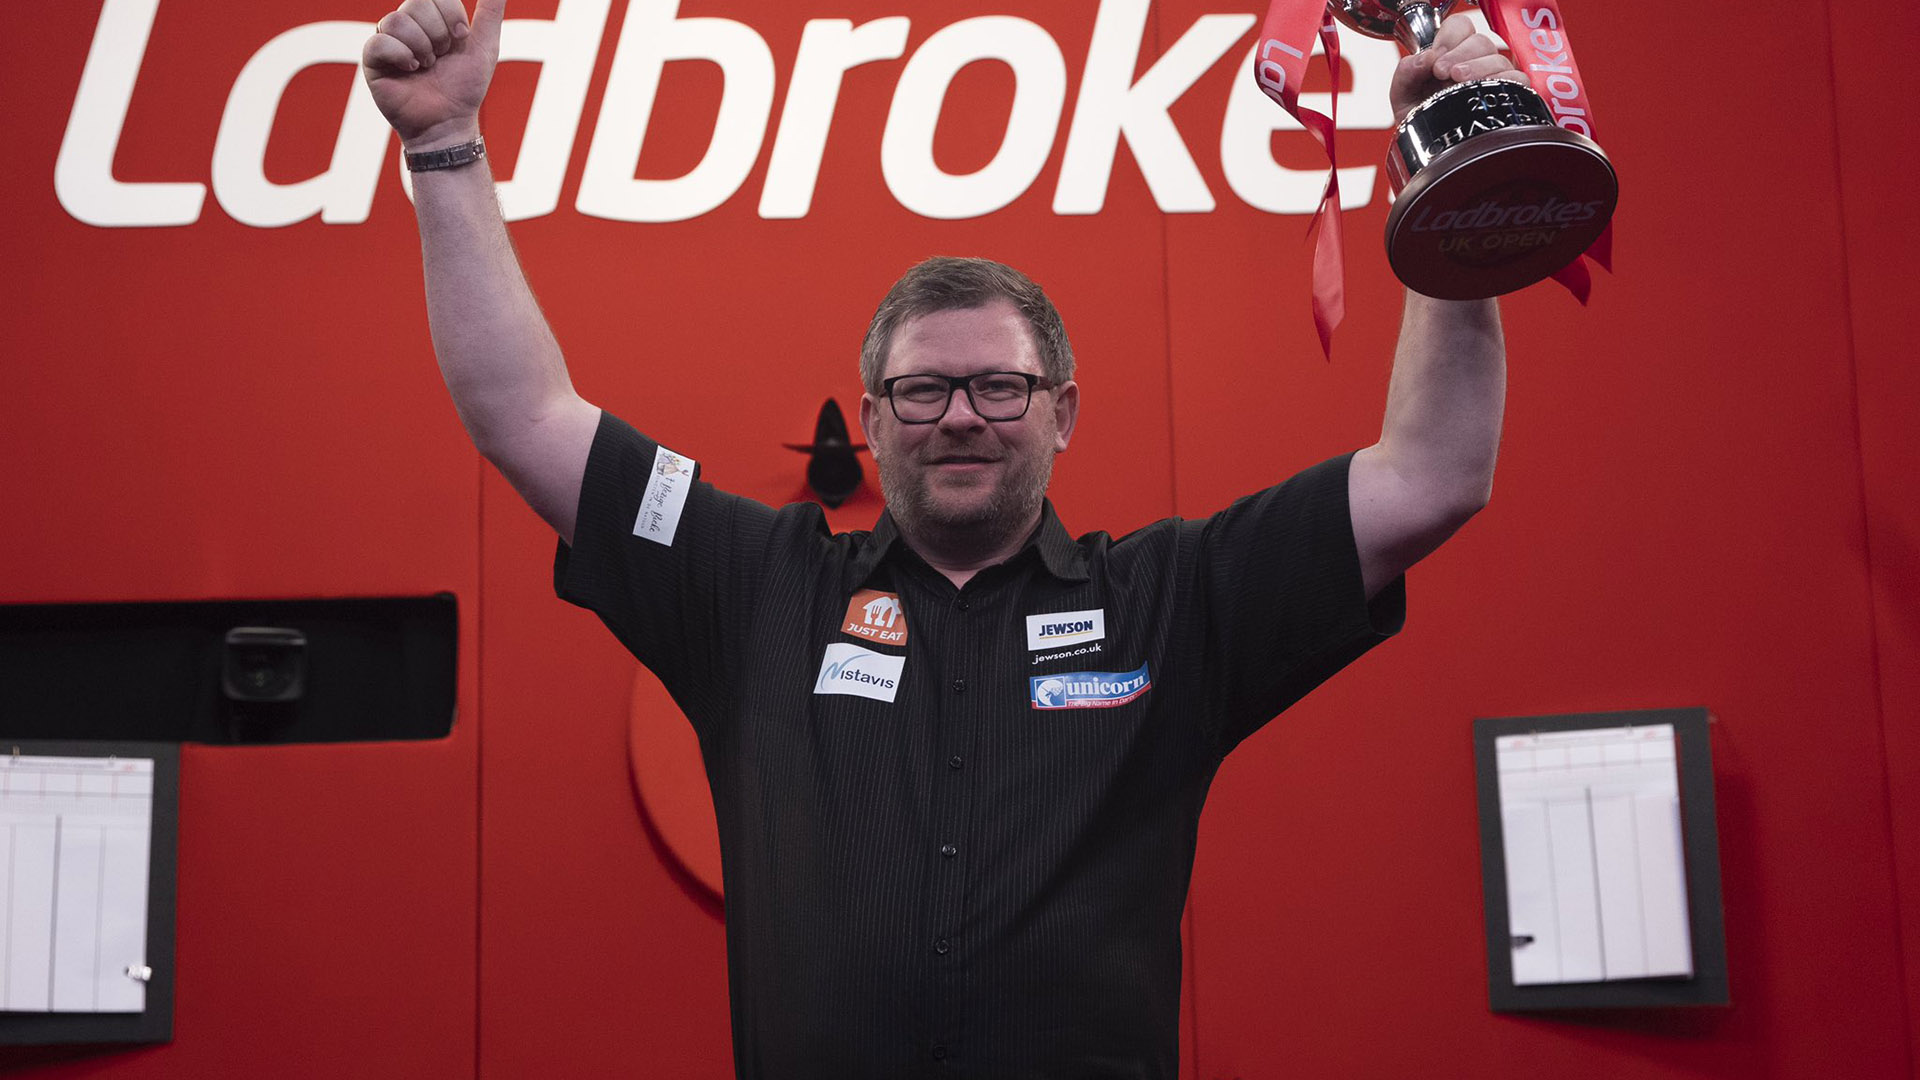 UK Open darts 2021 Draw, schedule, betting odds, results, live ITV4 coverage and tickets